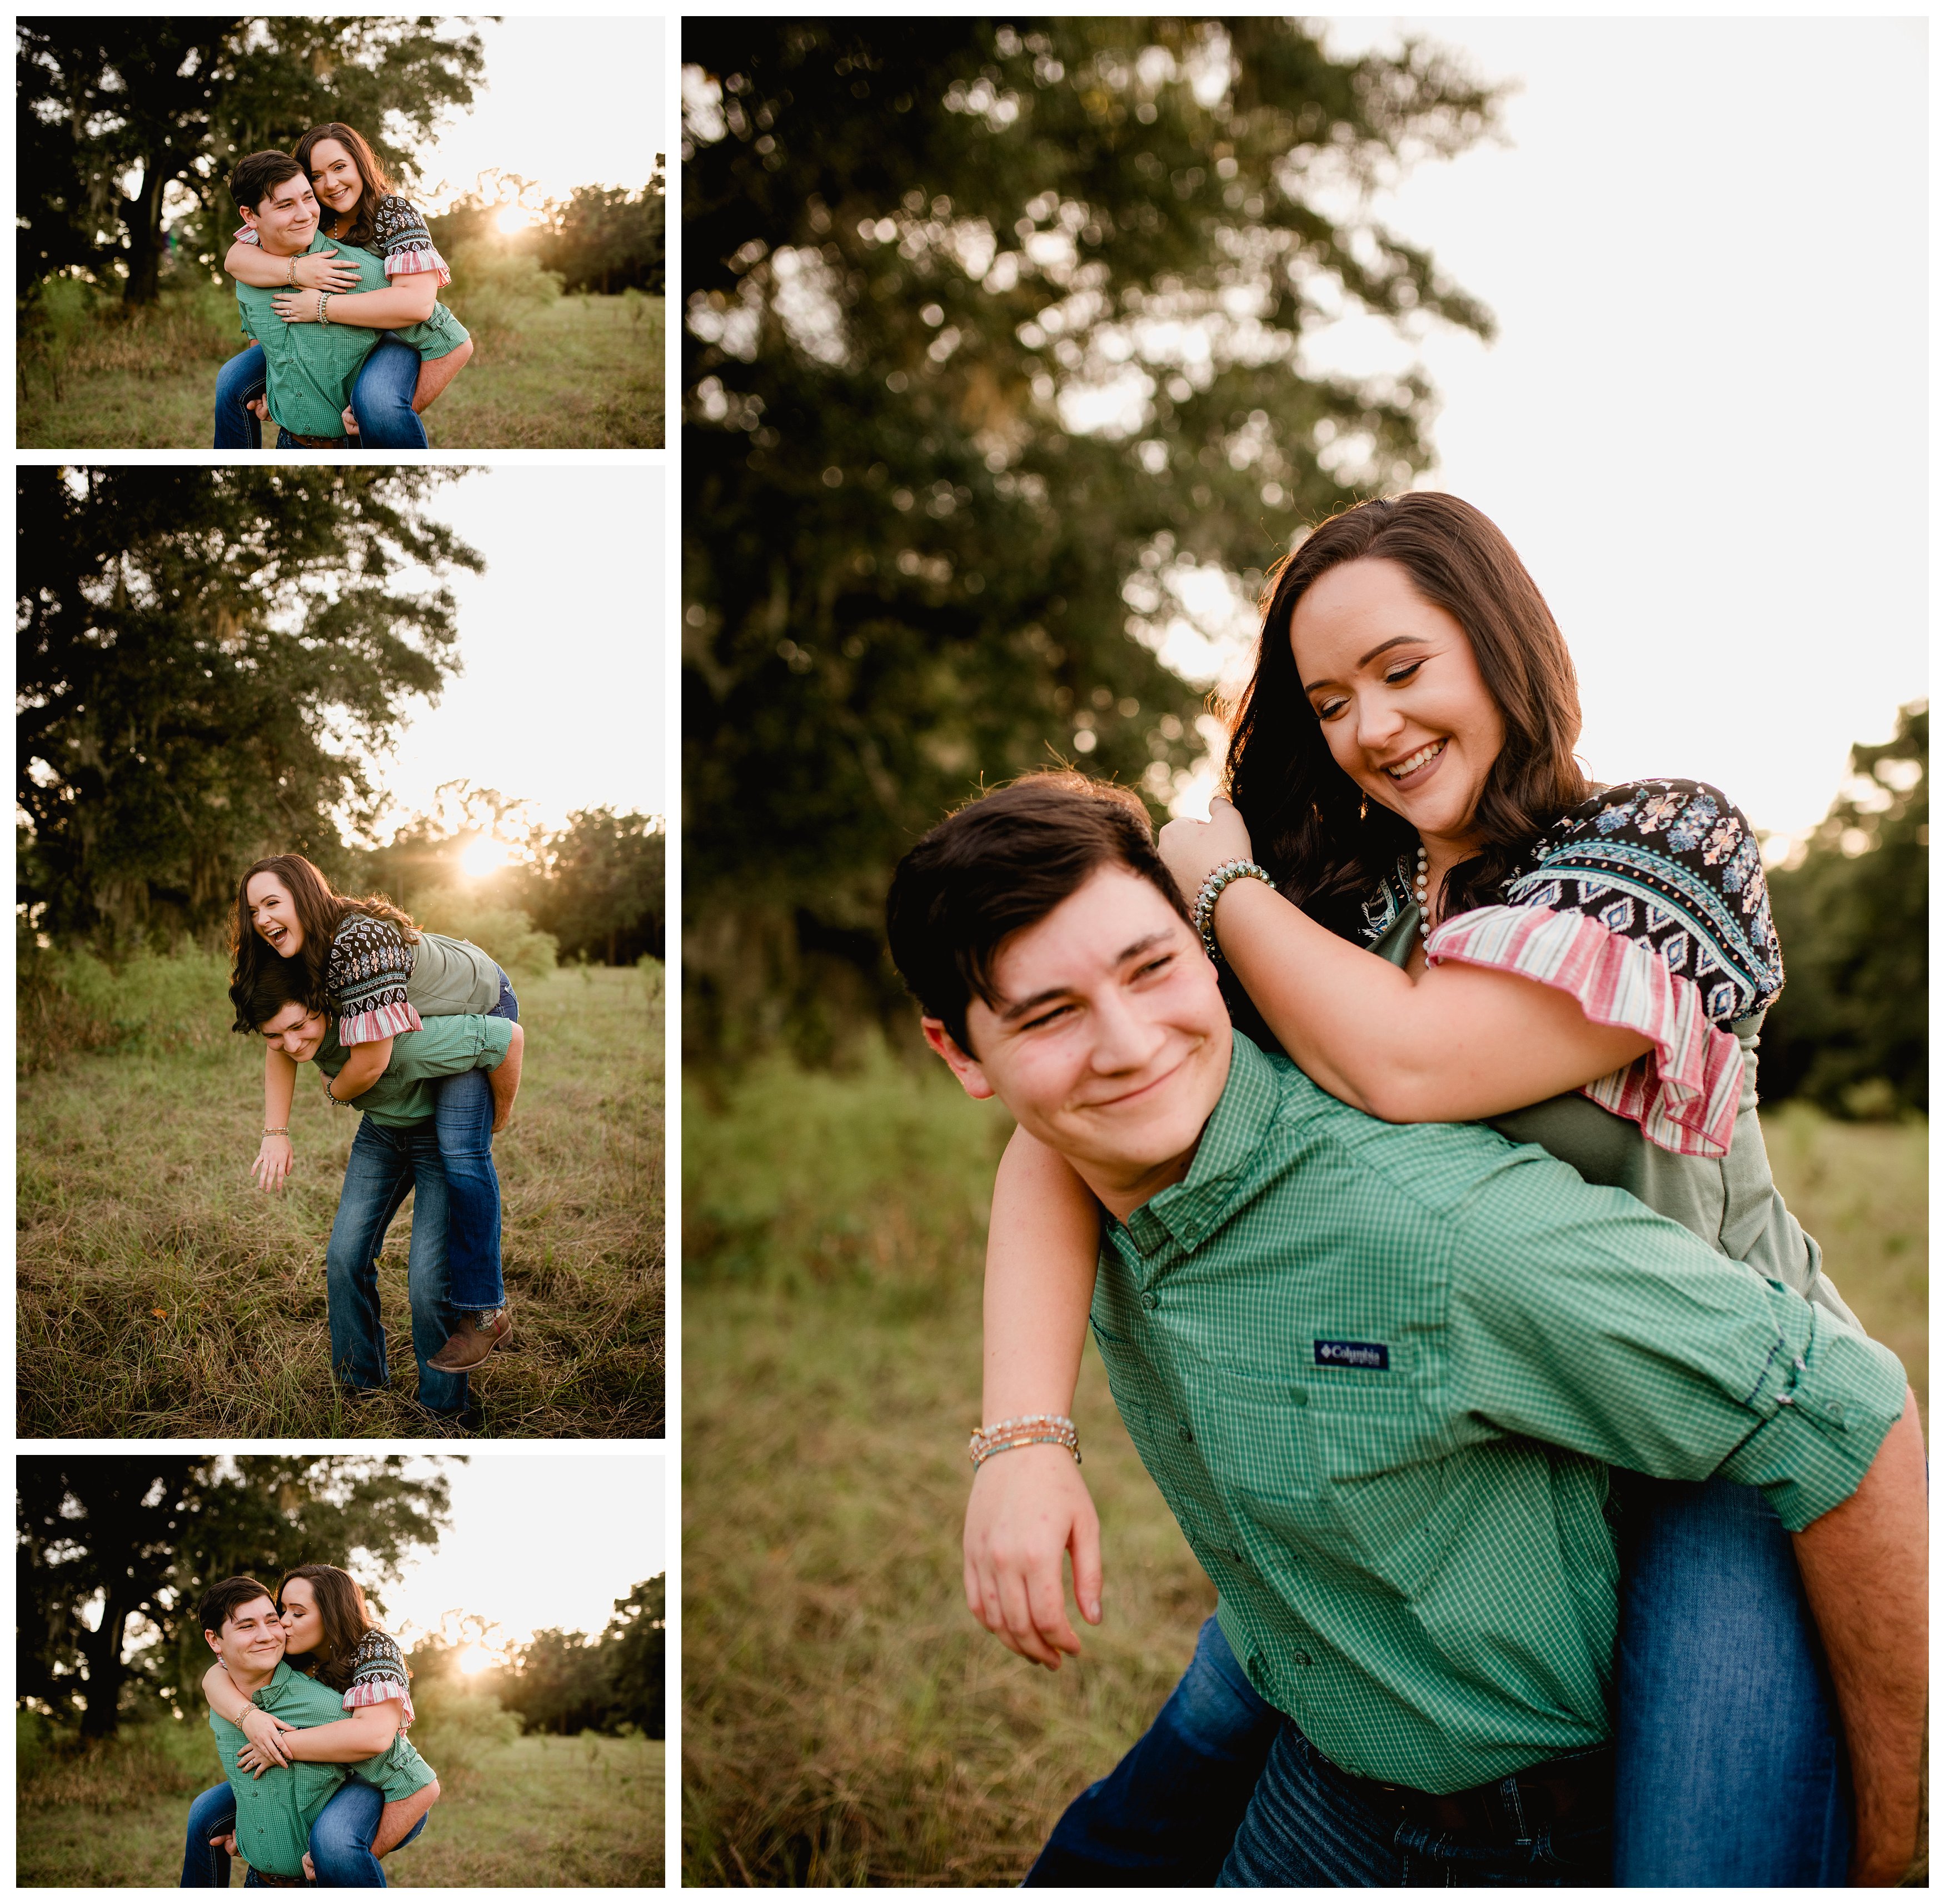 Fun and goofy posing ideas for couples pictures in a field.